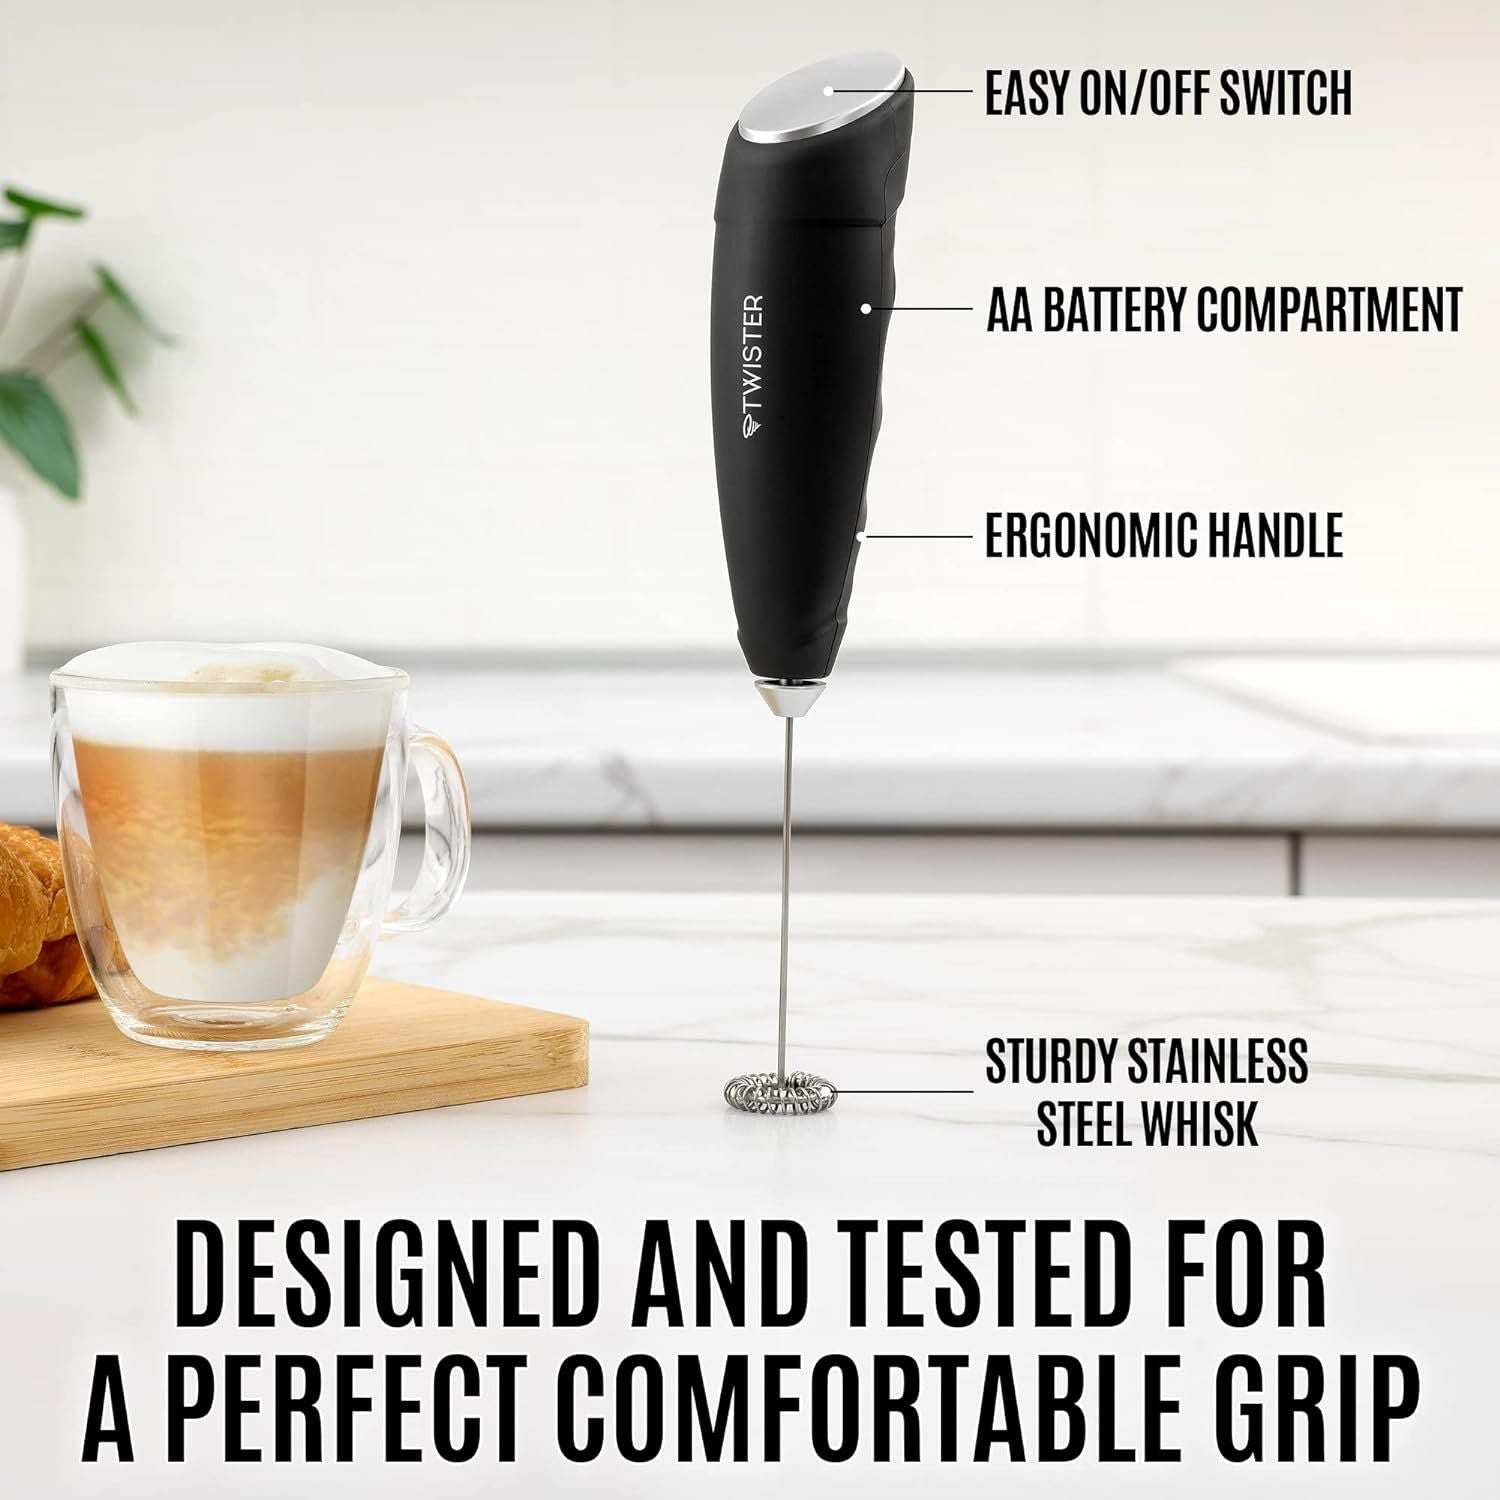 Peach Street Powerful Handheld Milk Frother, Mini Milk Frother, Battery Operated (Not Included) Stainless Steel Drink Mixer - Milk Frother Stand for